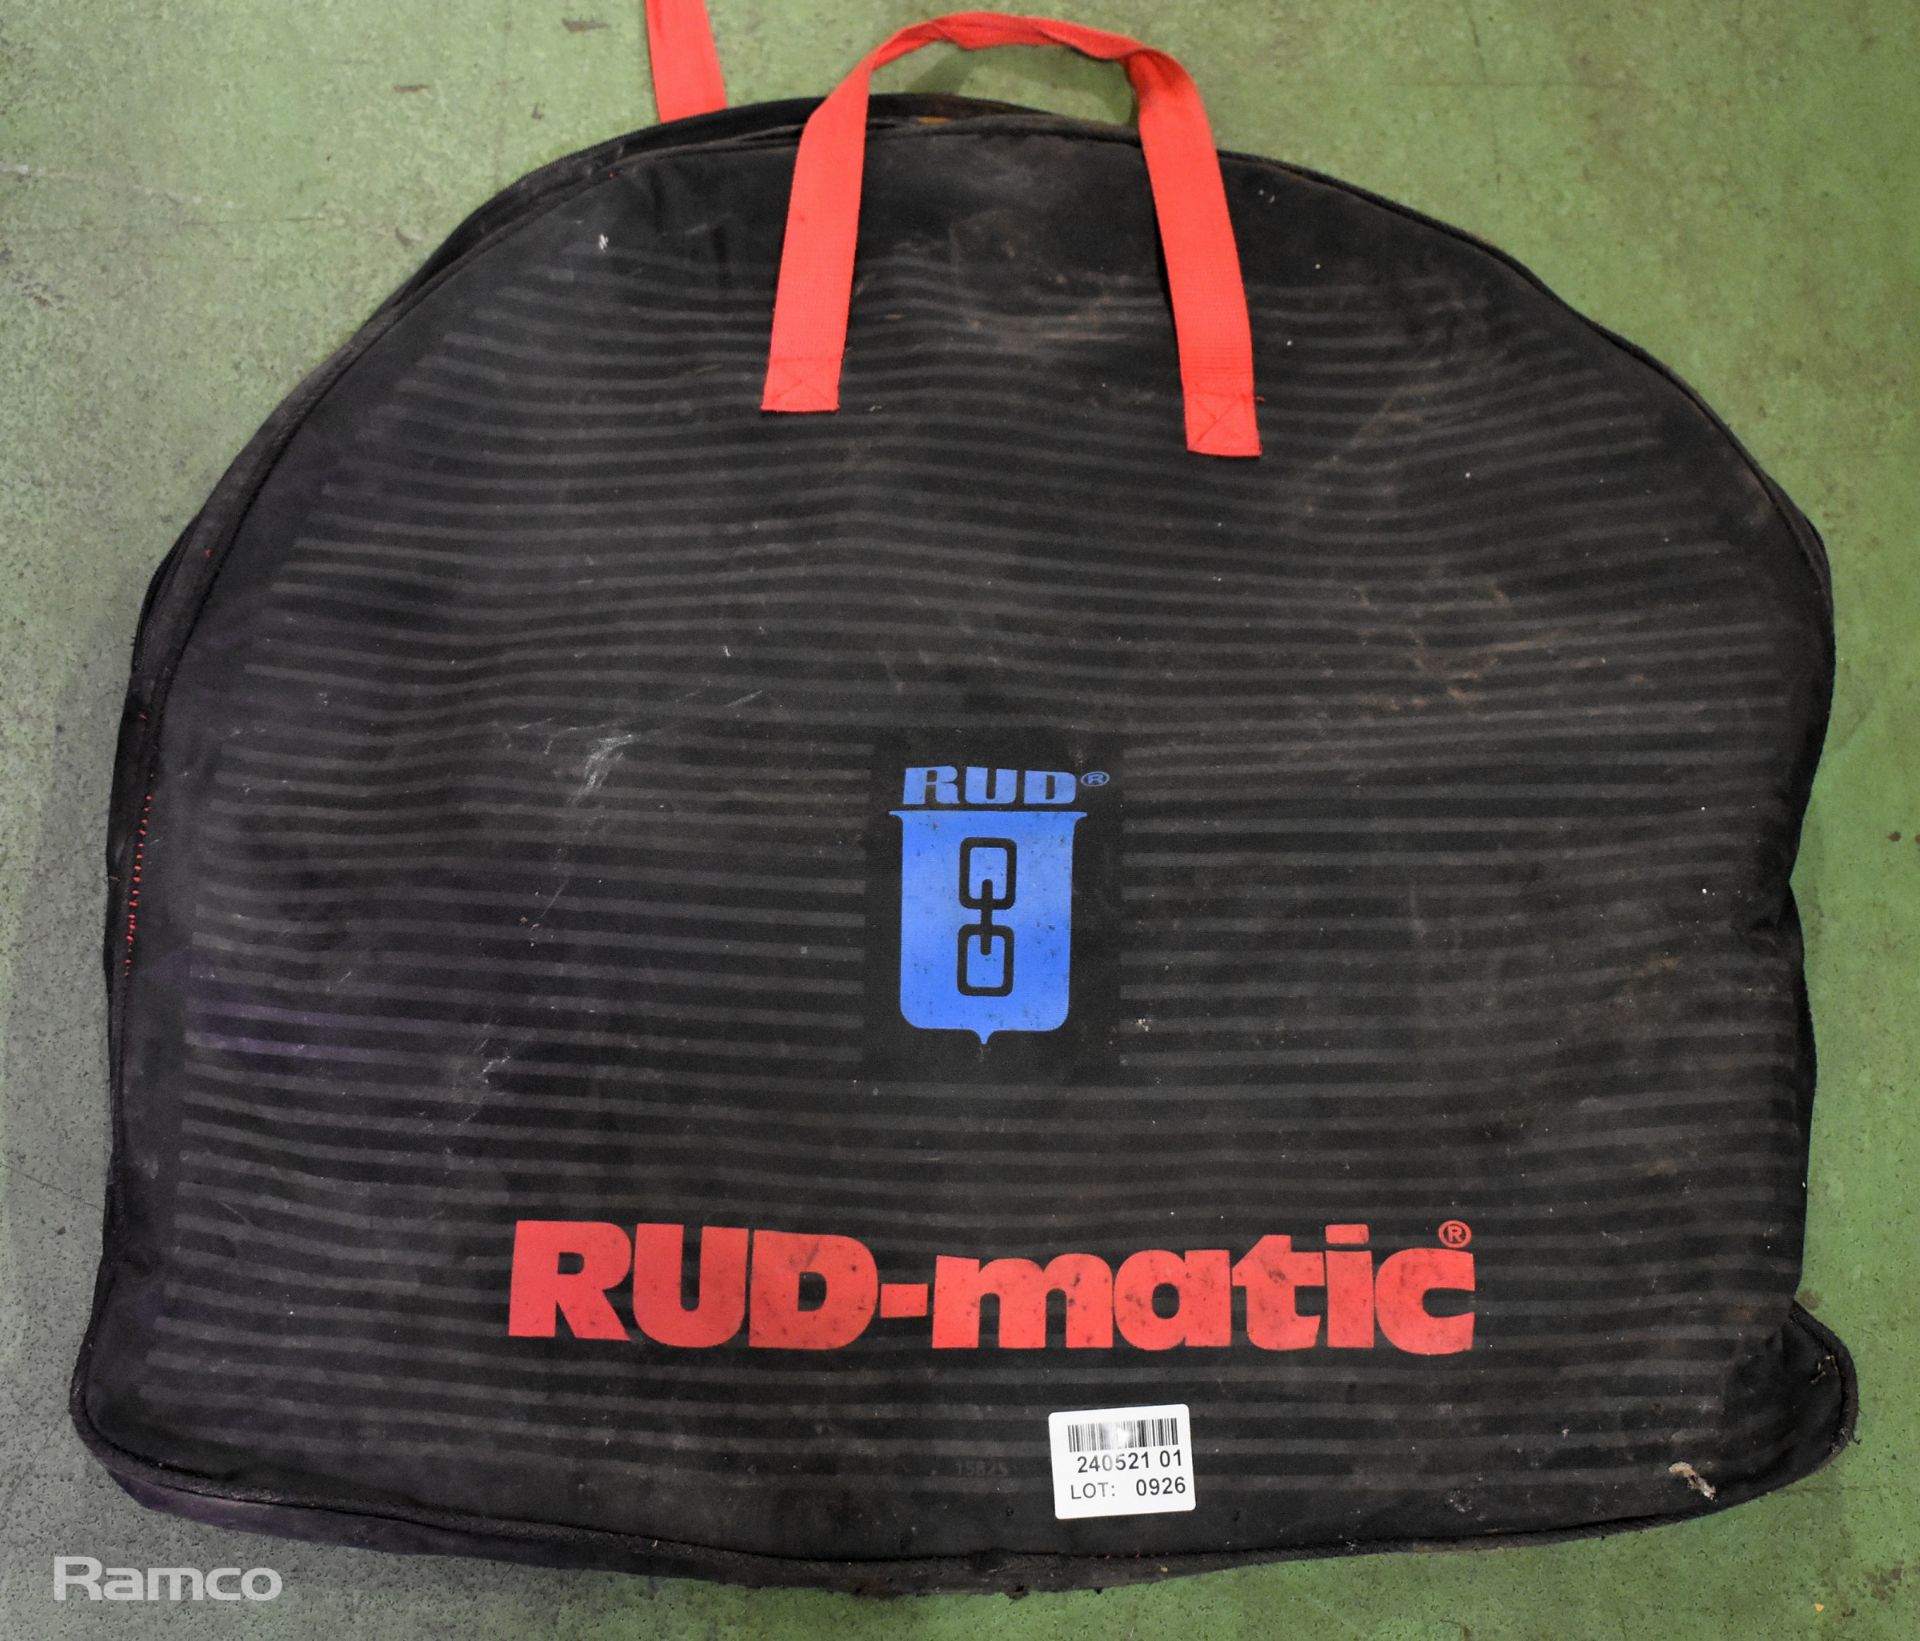 Rud-matic 69 cm single snow chain in carry case - Image 4 of 4